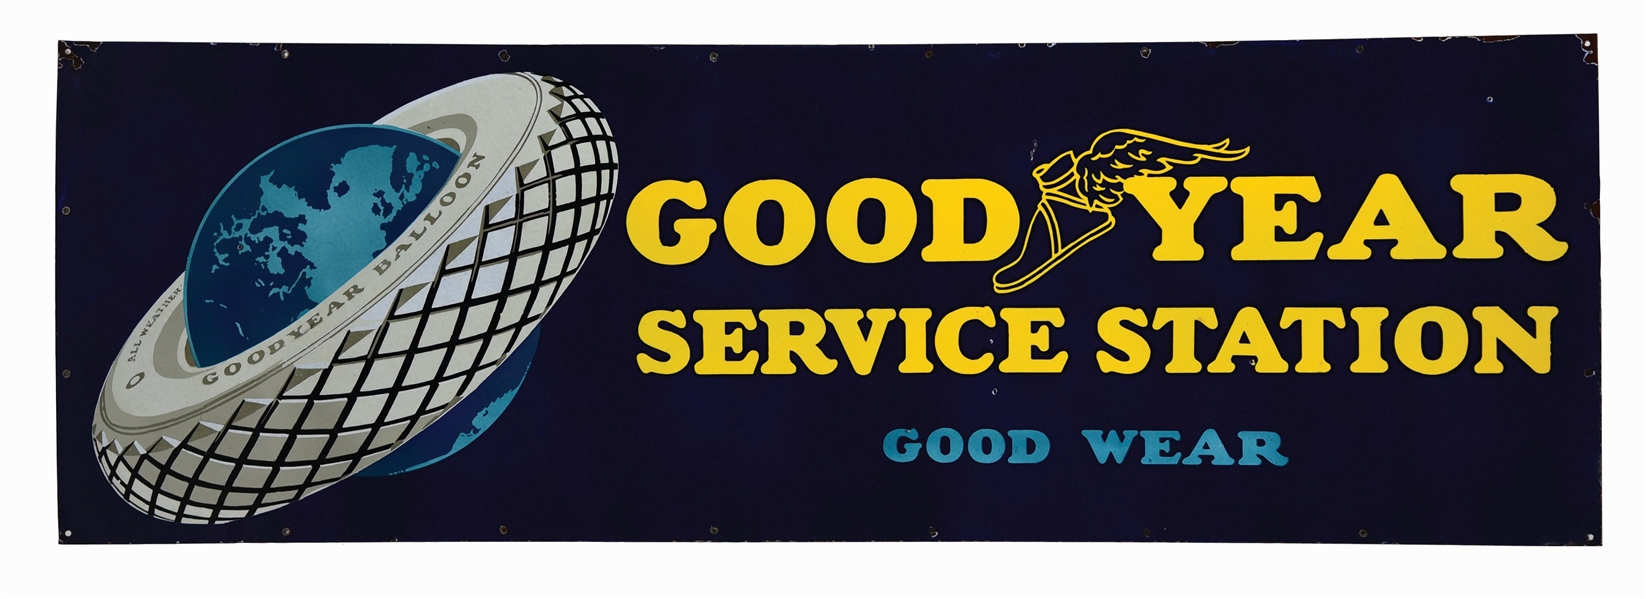 GOODYEAR TIRES SERVICE STATION PORCELAIN SIGN W/ TIRE & GLOBE GRAPHIC. 